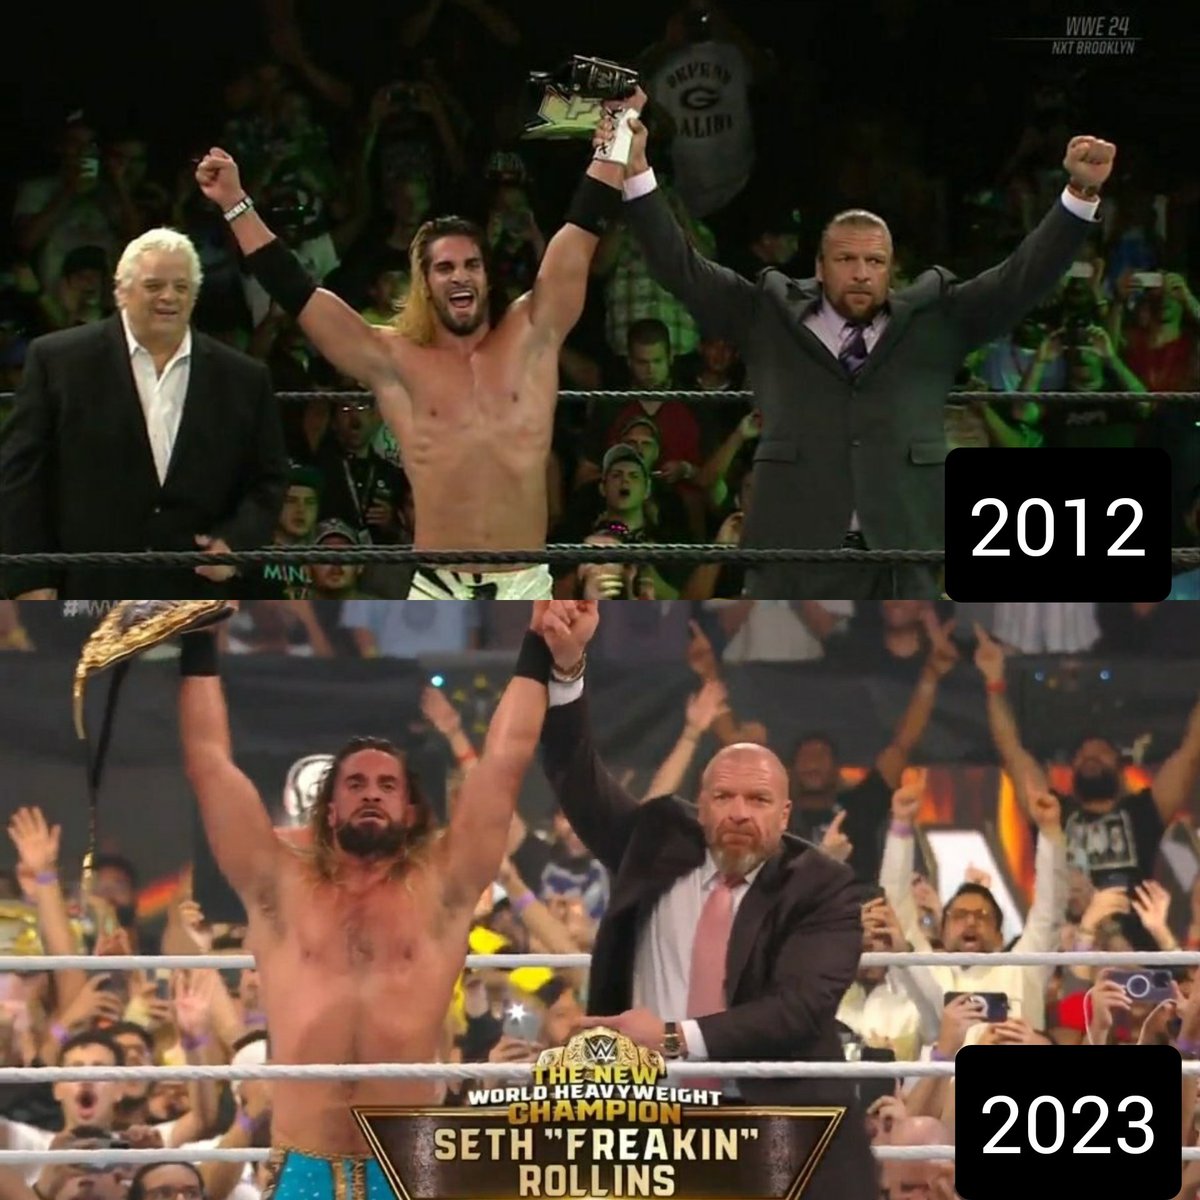 'It felt very much like a full circle moment at Night of Champions, almost like a wormhole back in time, to NXT to that first Championship match, to him being there to raise my hand. It's very surreal.' - @WWERollins 🤝 @TripleH #WWERivals 😍